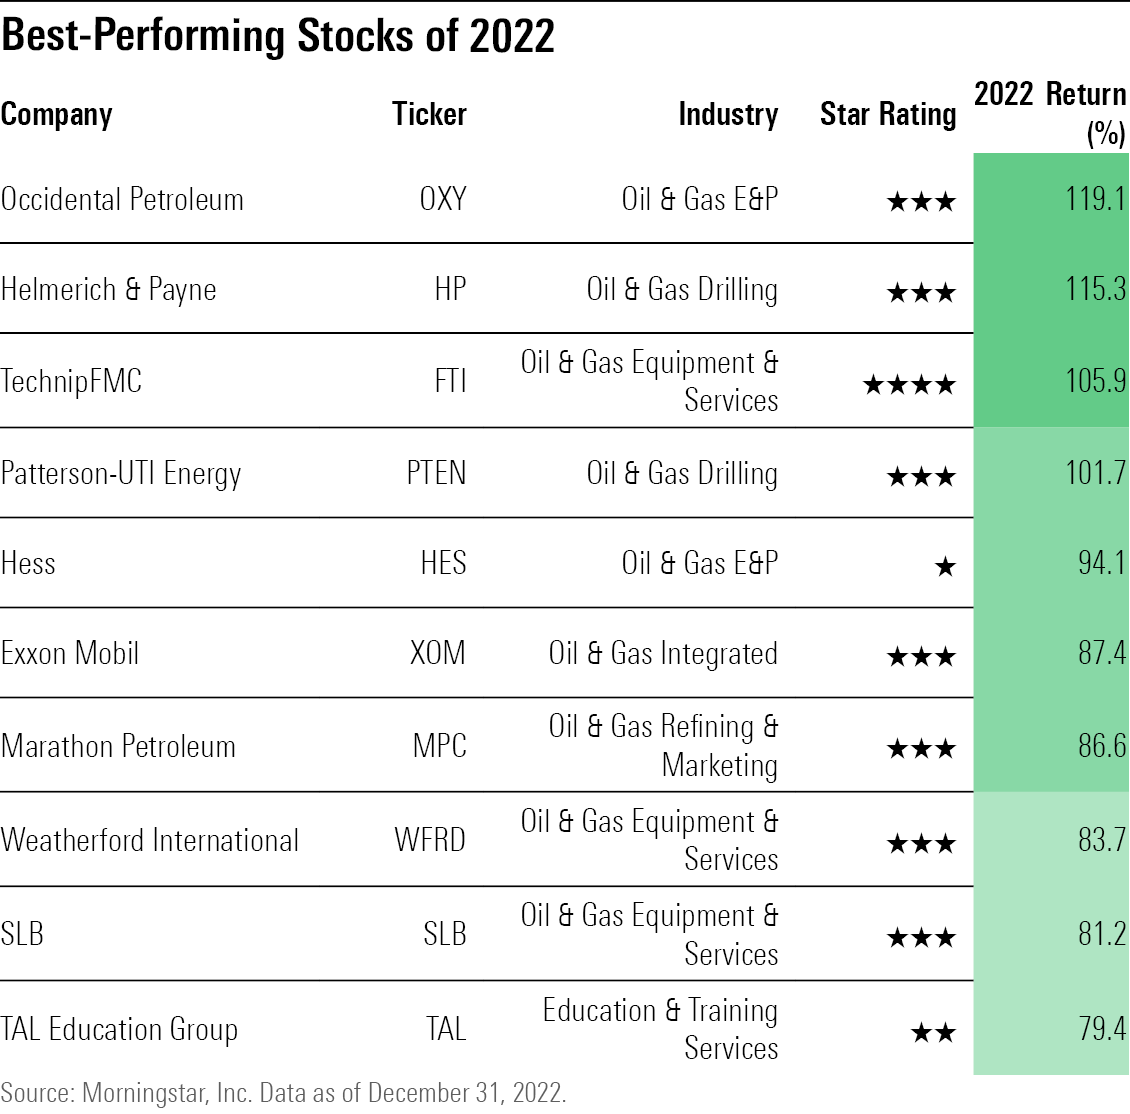 A table showing the best-performing U.S.-listed stocks among those covered by Morningstar analysts.